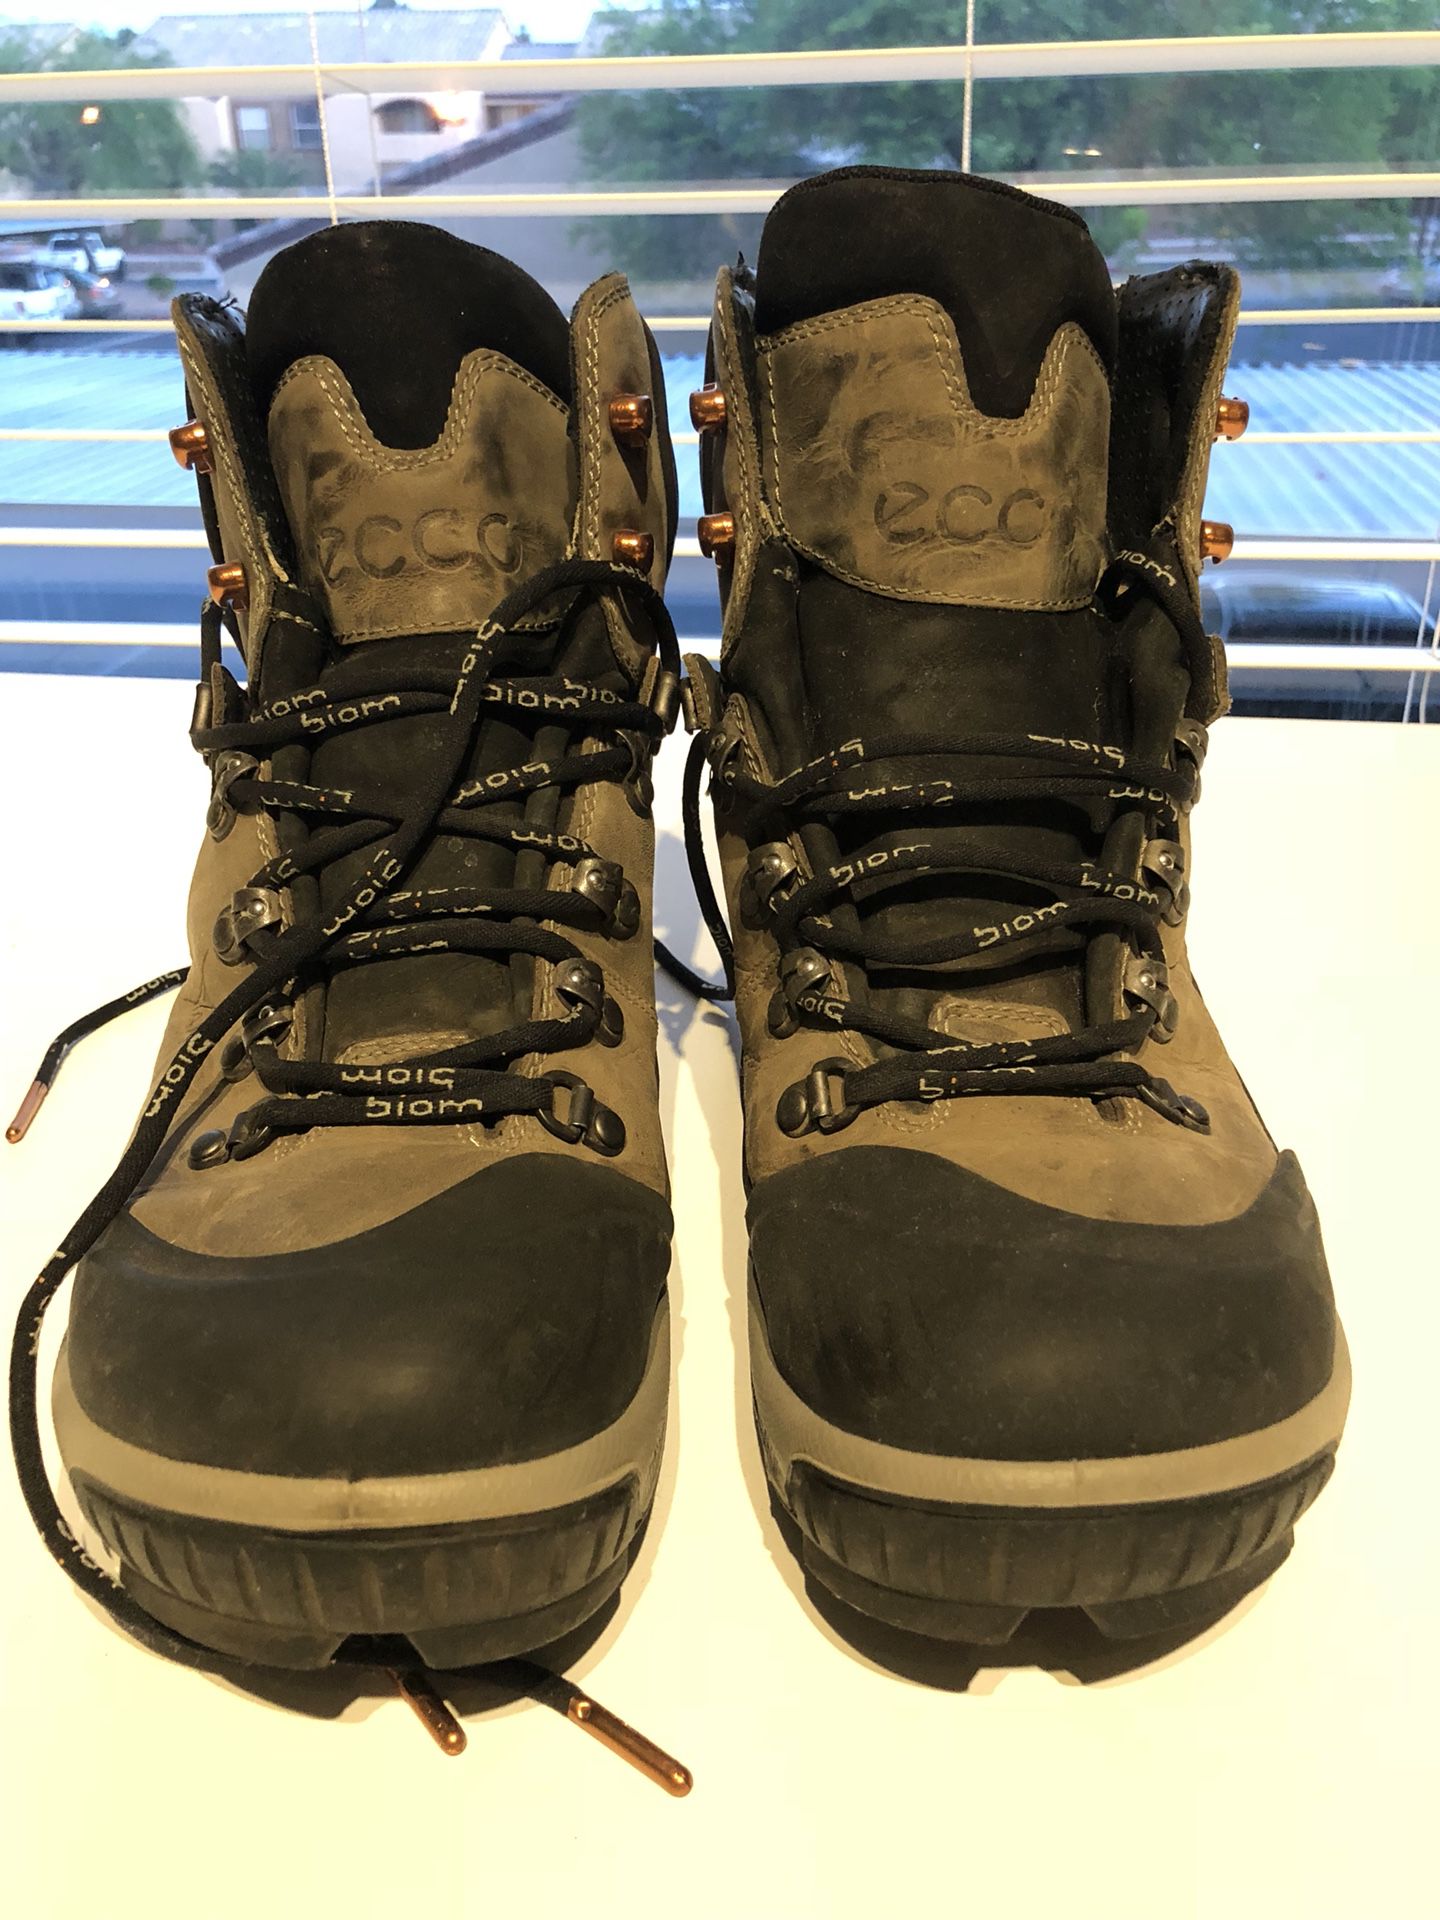 BIOM HIKING BOOTS 42 Leather for in Las Vegas, NV -